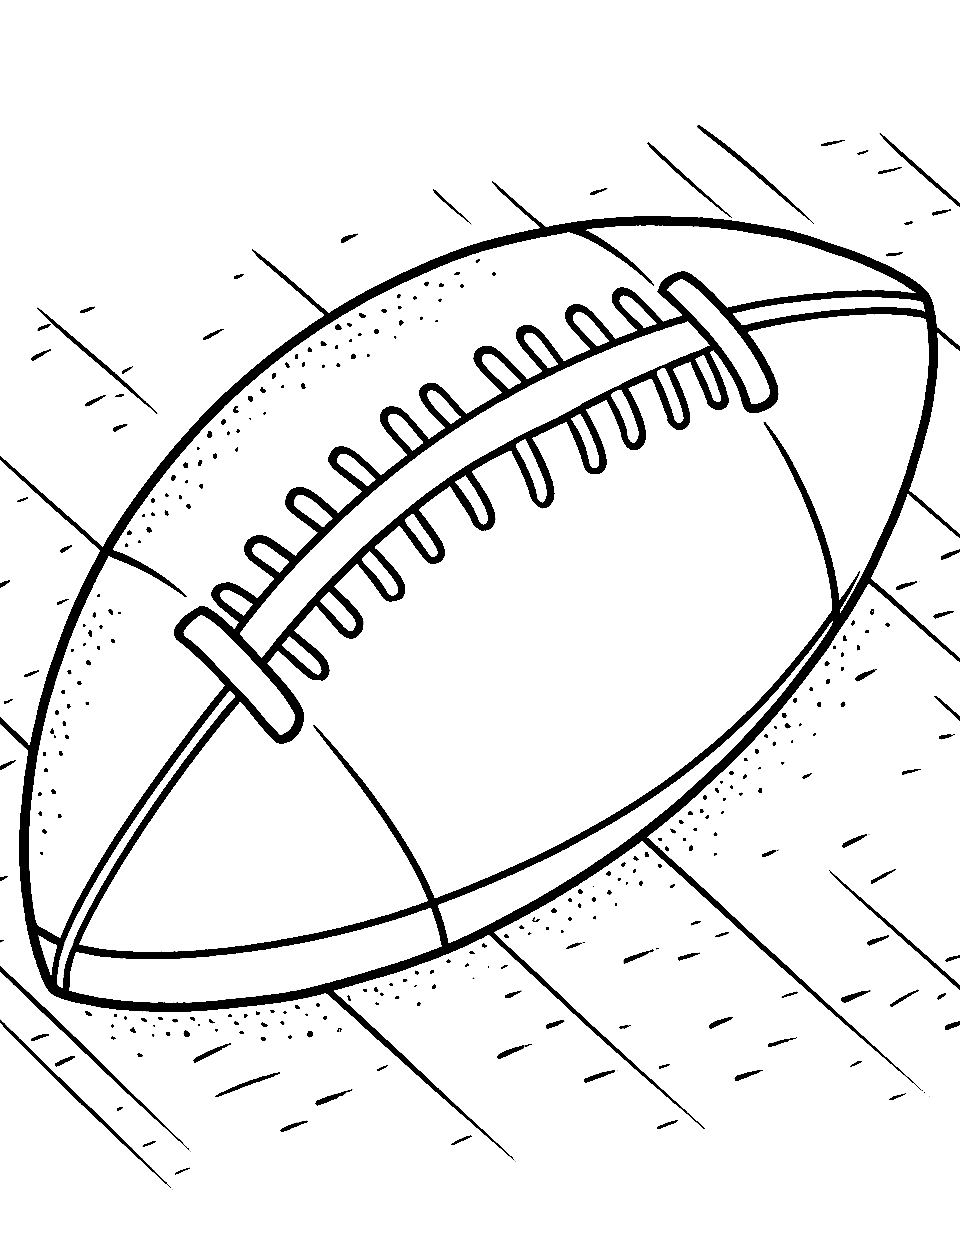 Football Closeup Coloring Page - A close-up of a football ready to get drawn with colors.